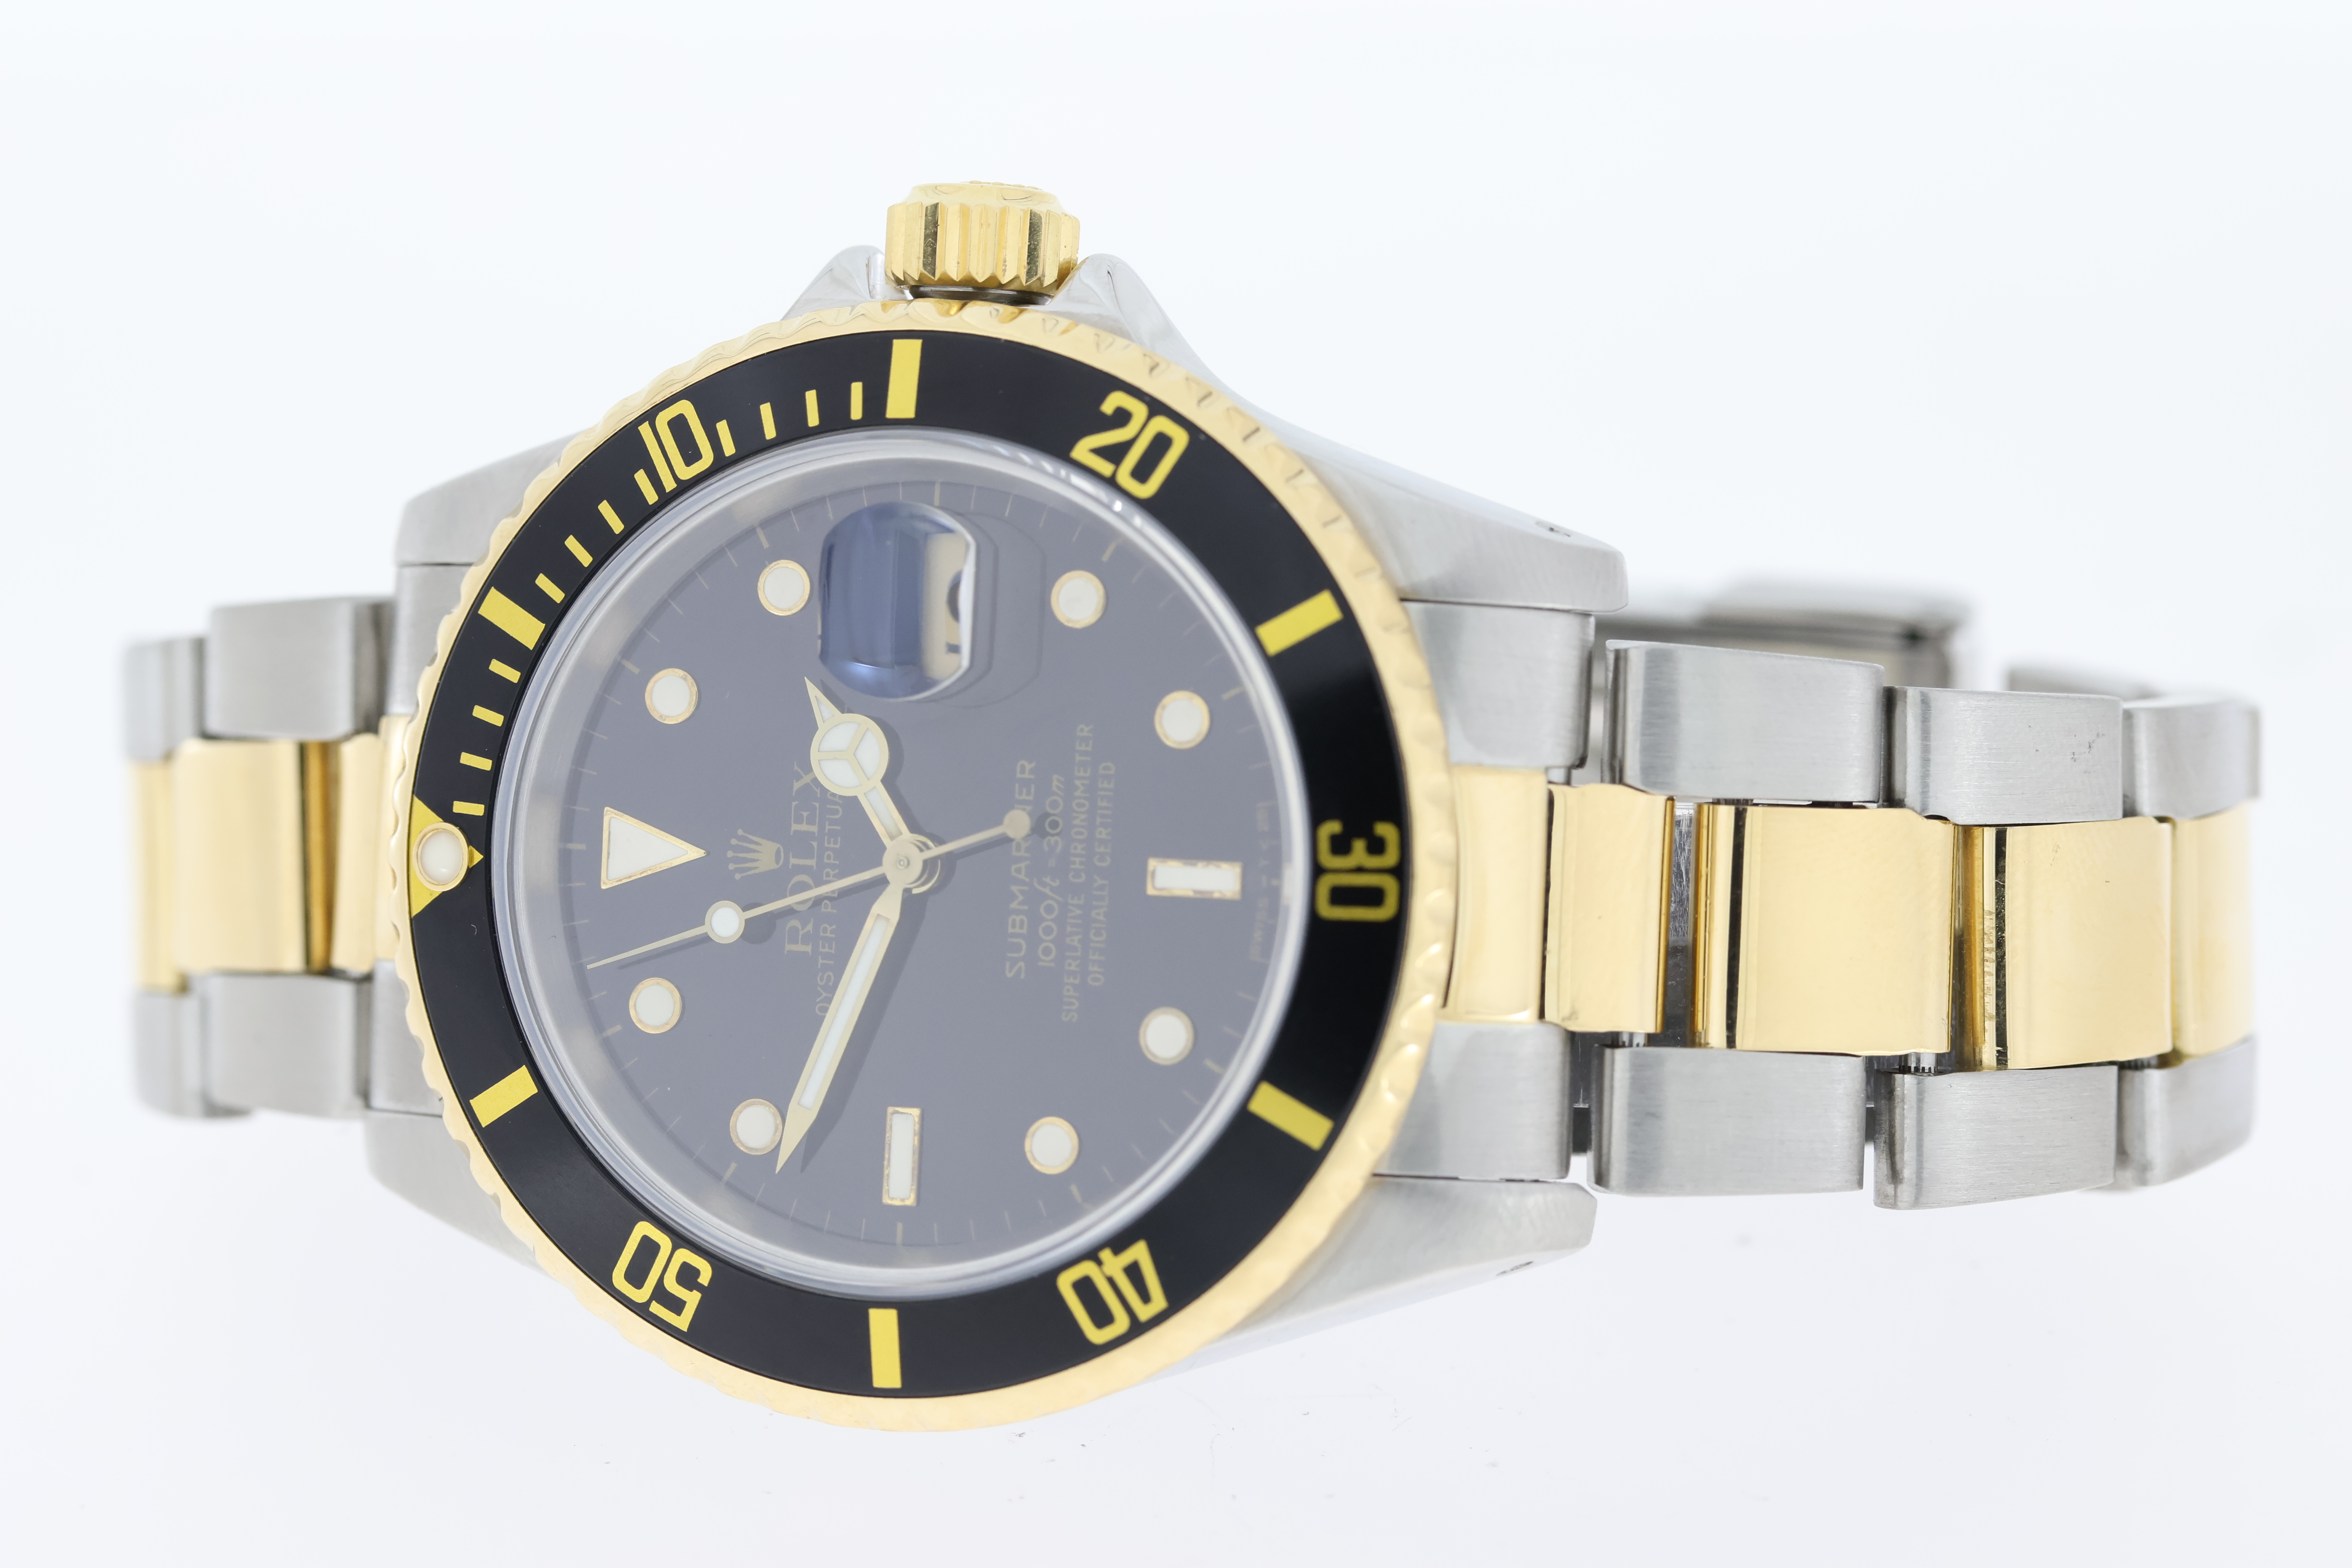 Rolex Submariner Date Reference 16613 with Box and Papers Circa 1990 - Image 3 of 5